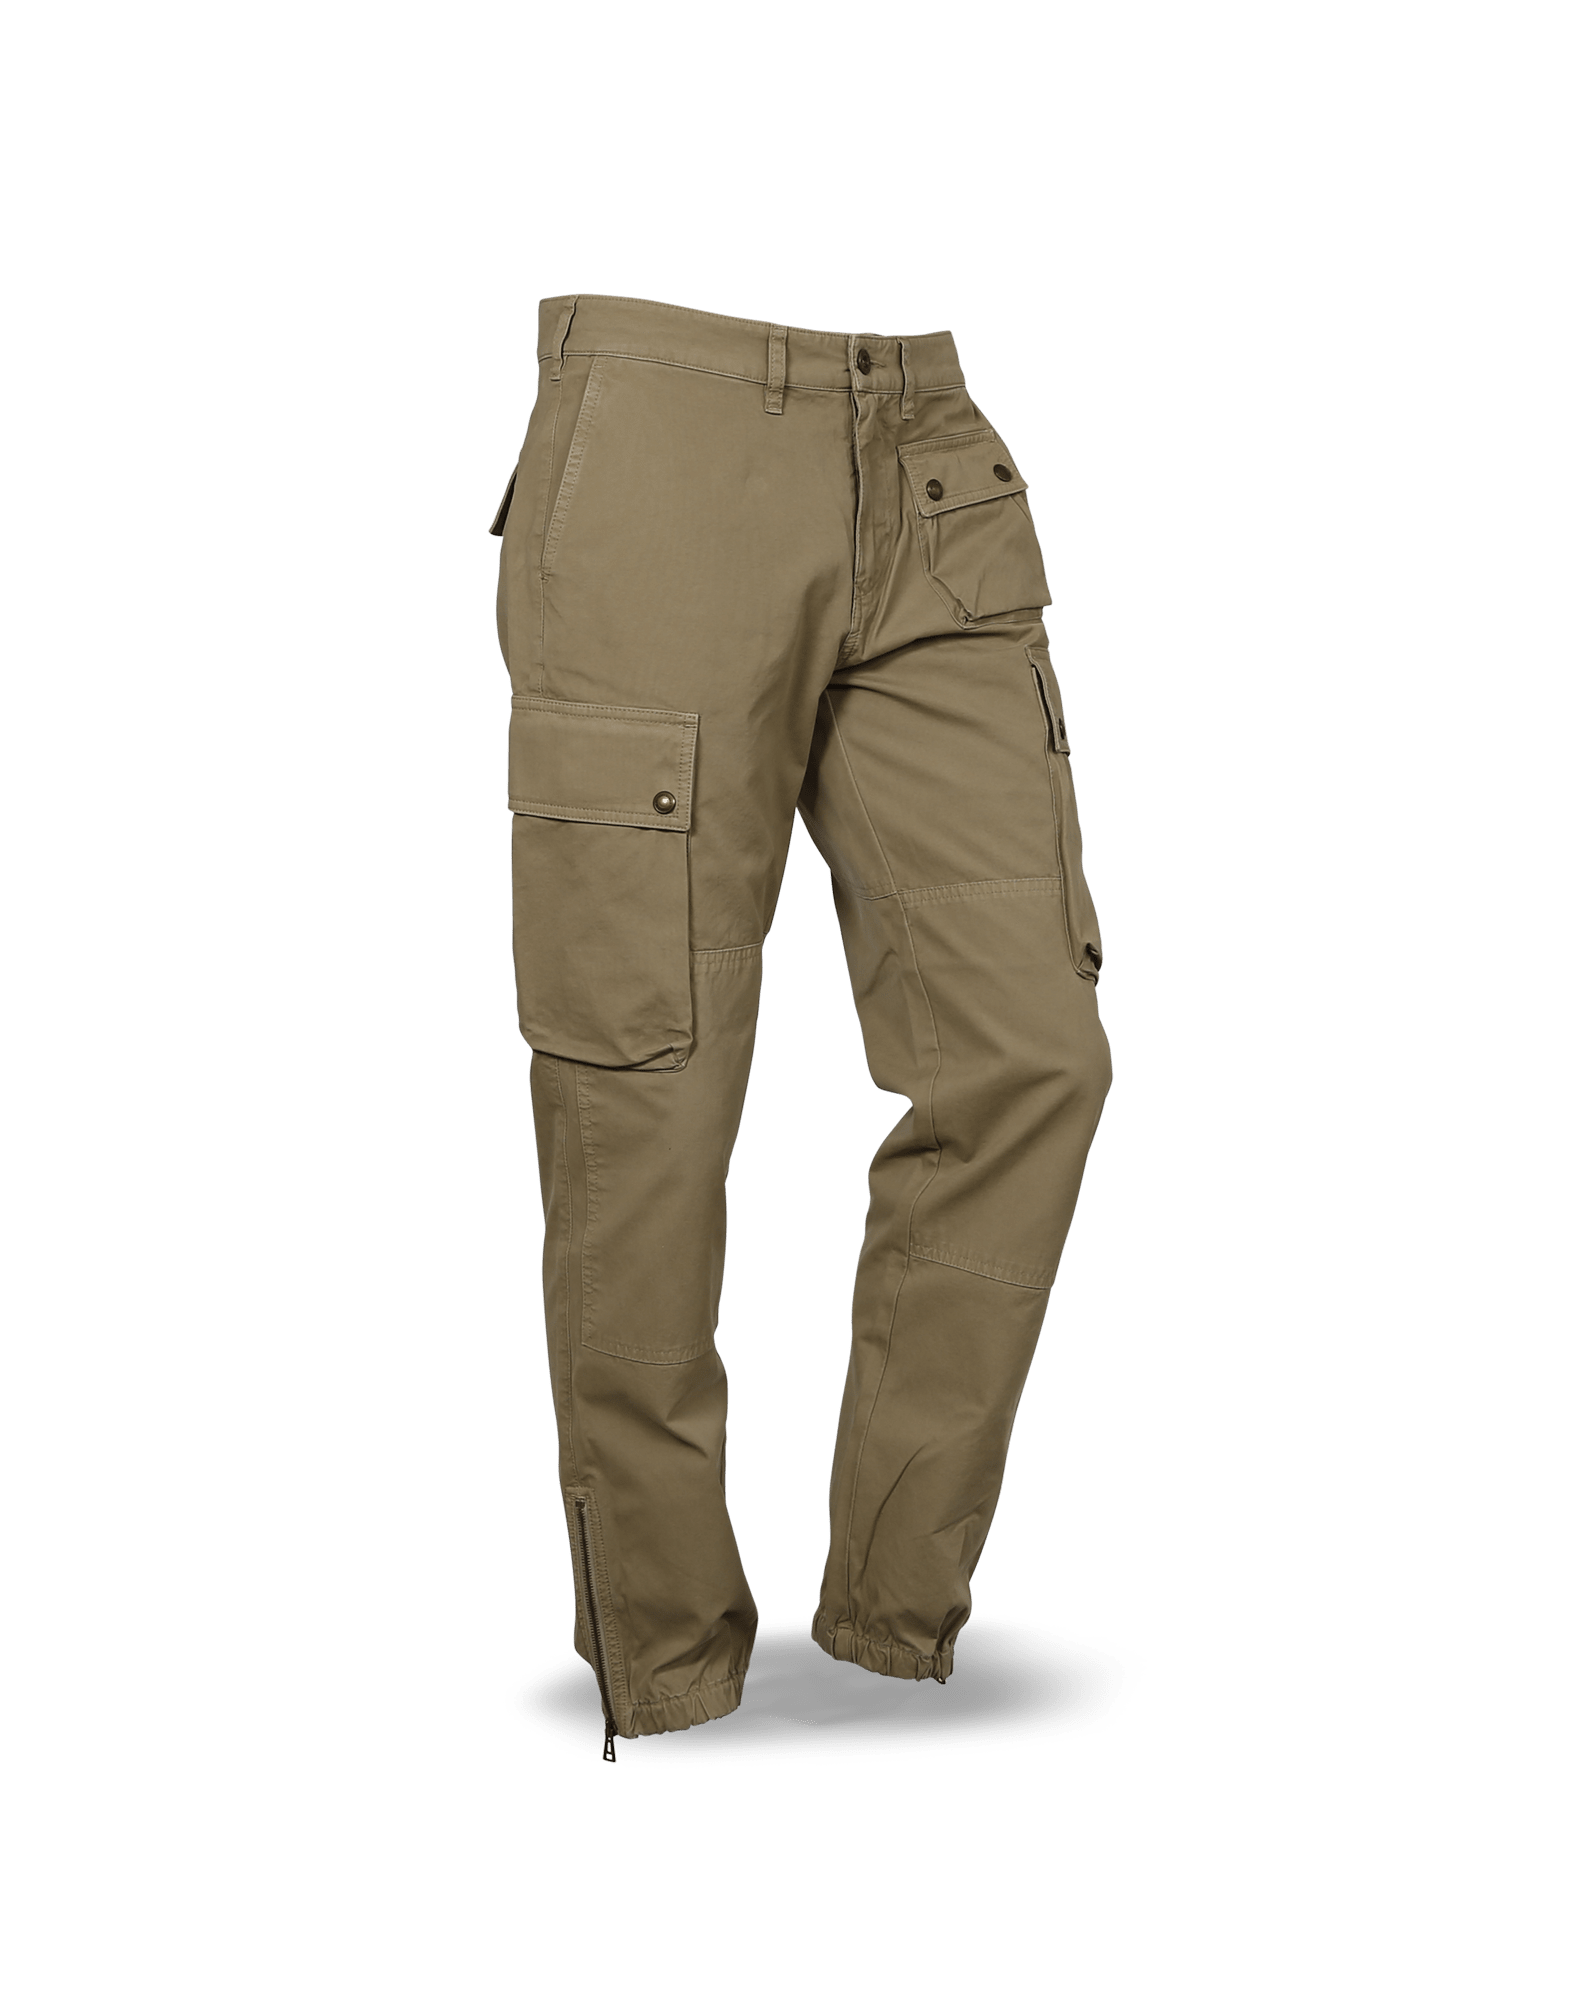 Big holiday Deals! WQQZJJ Casual Fashion Cargo Pants For Men, Men's Cargo  Trousers Work Wear Combat Safety Cargo 6 Pocket Full Pants On Clearance -  Walmart.com